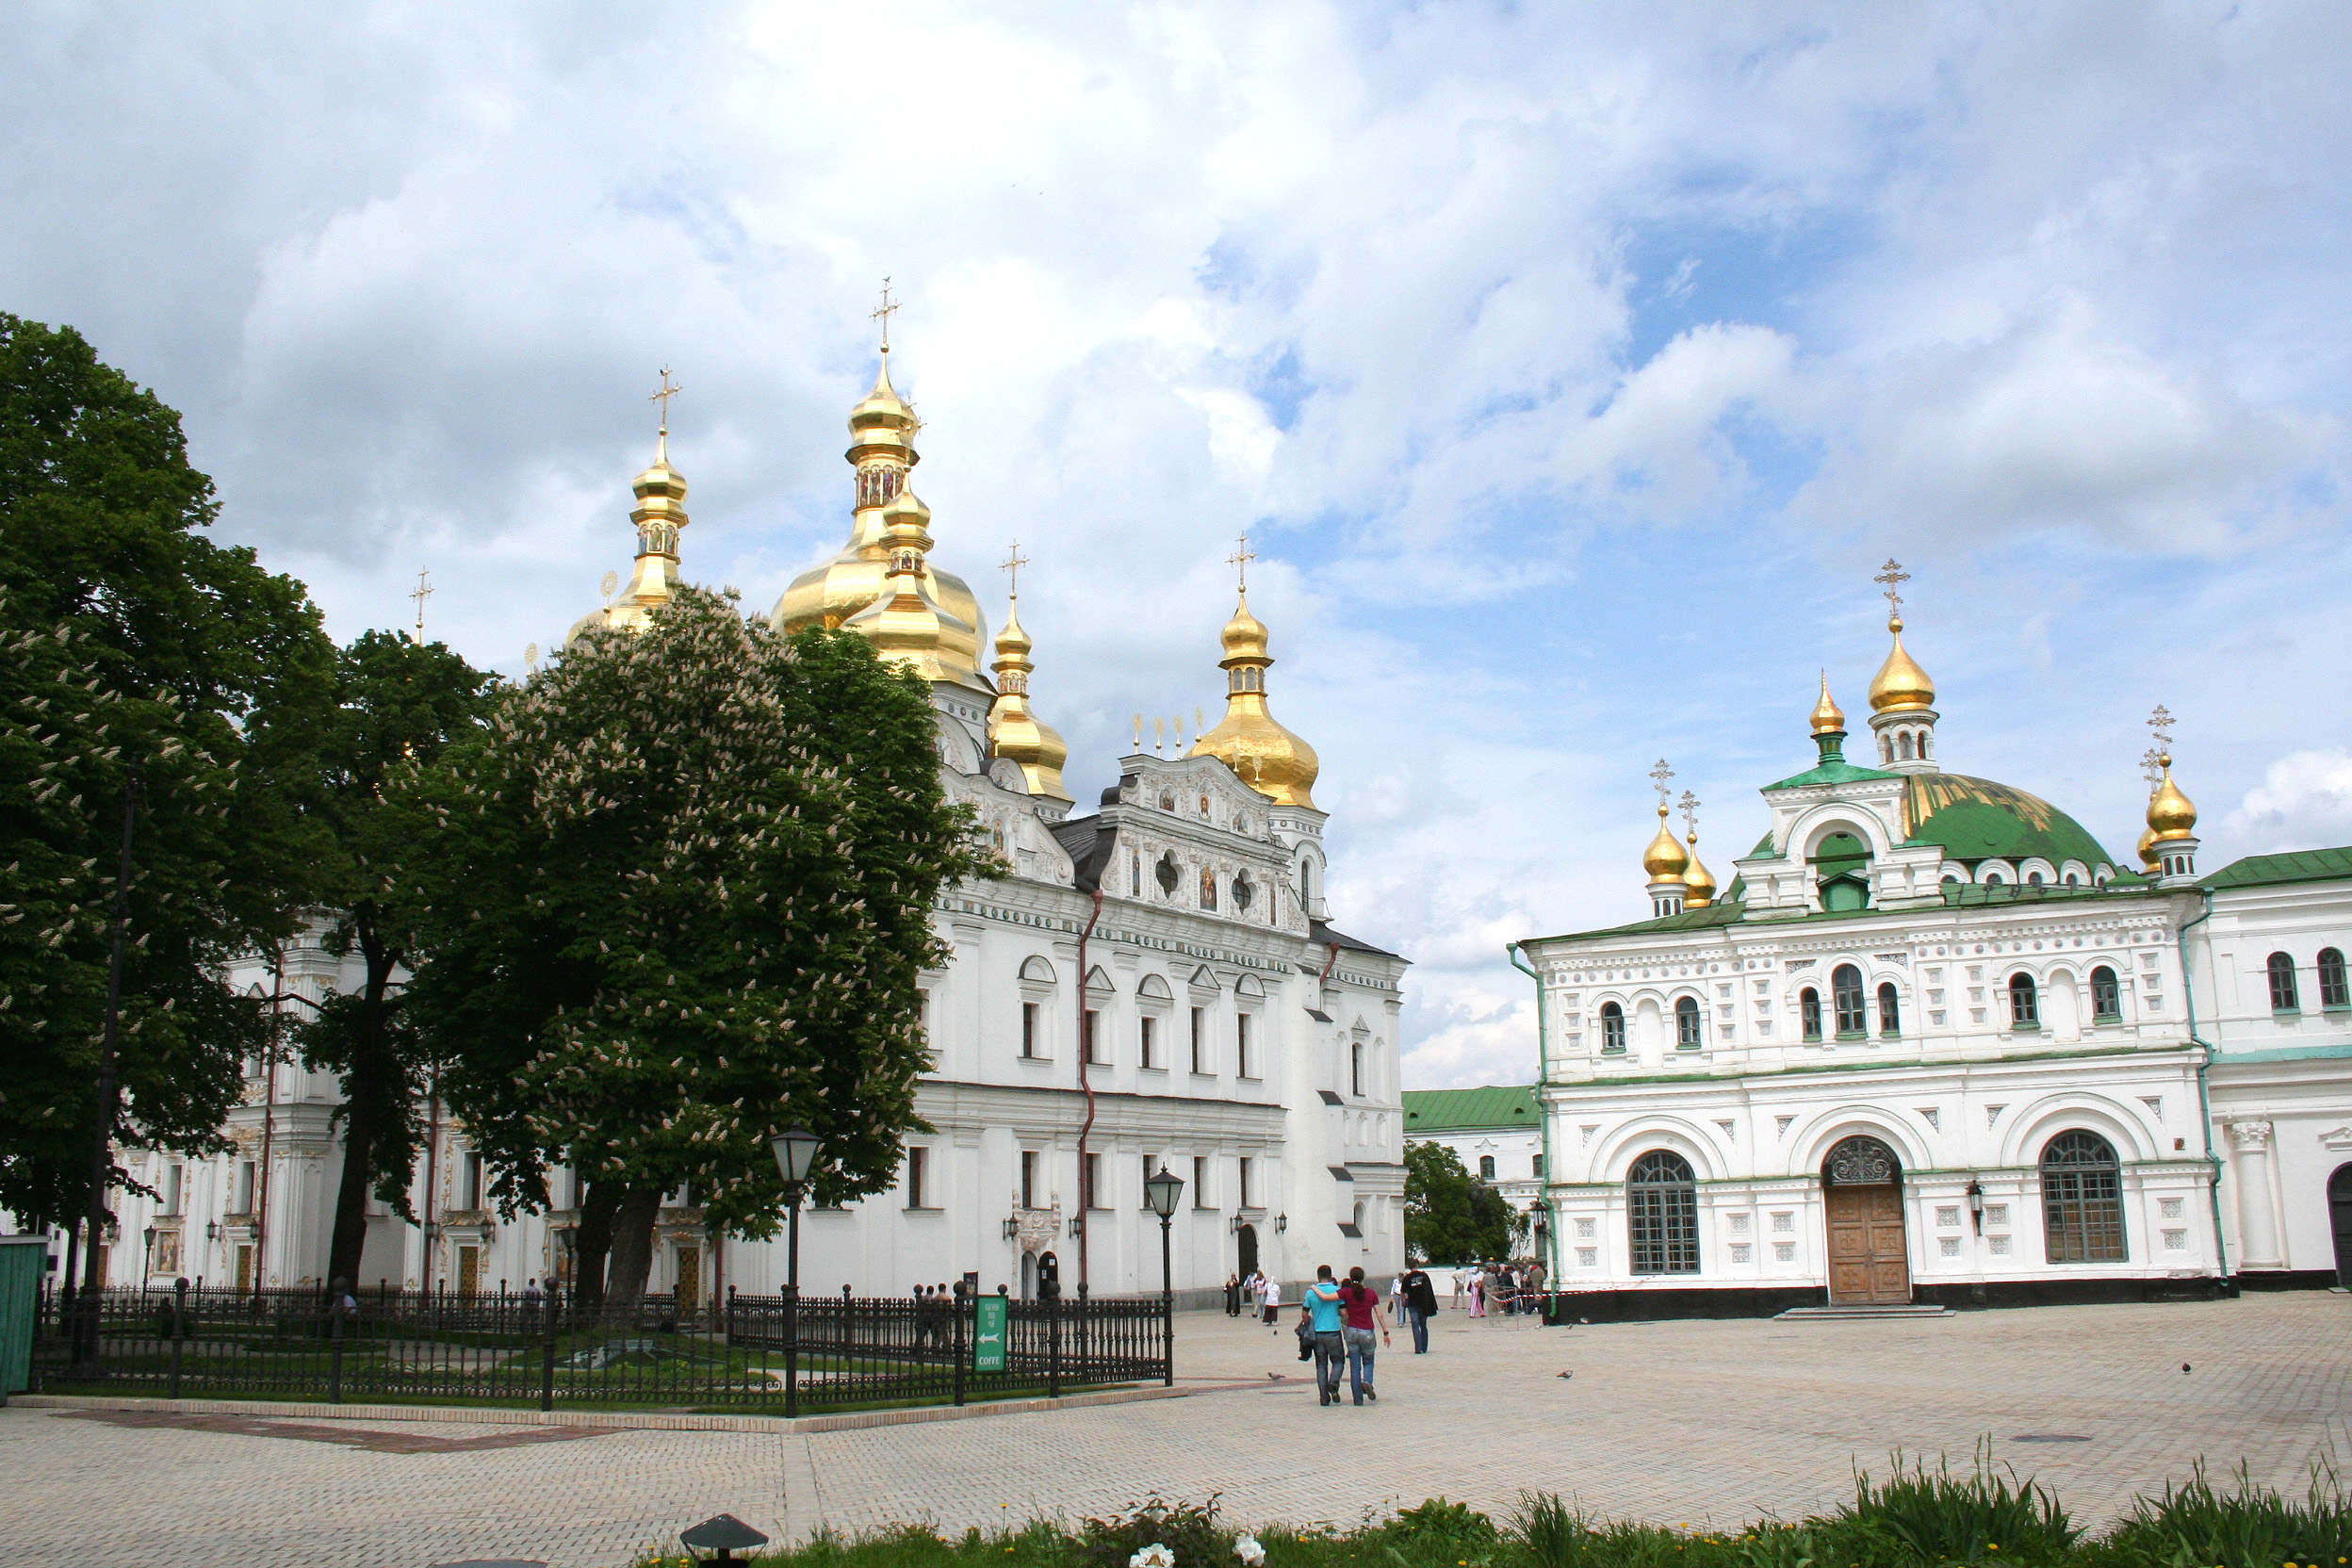 View of the Dormition Cathedral and another building to its right.